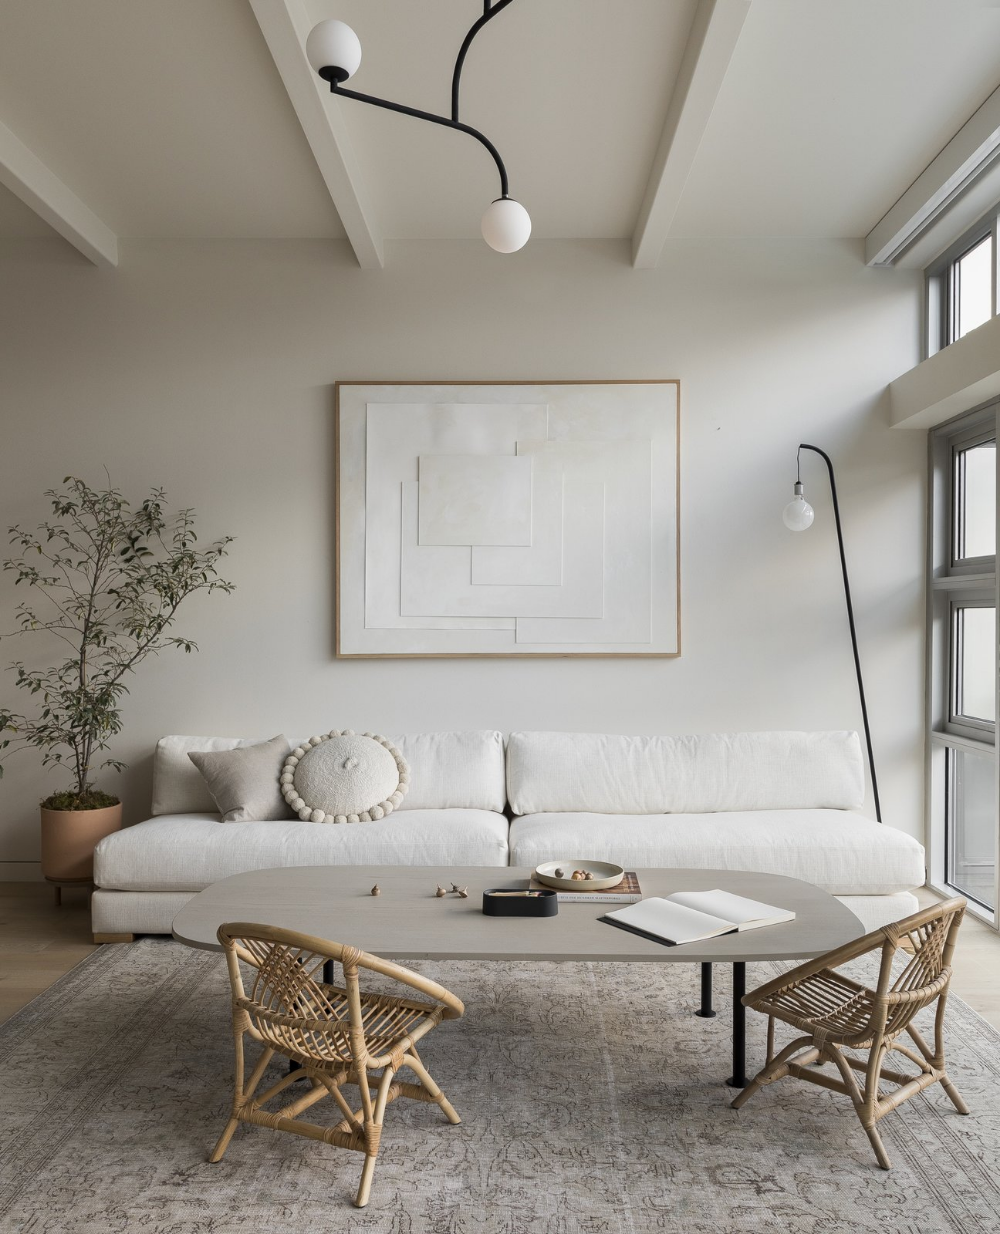  has simplicity become more popular in home decor and lifestyle?